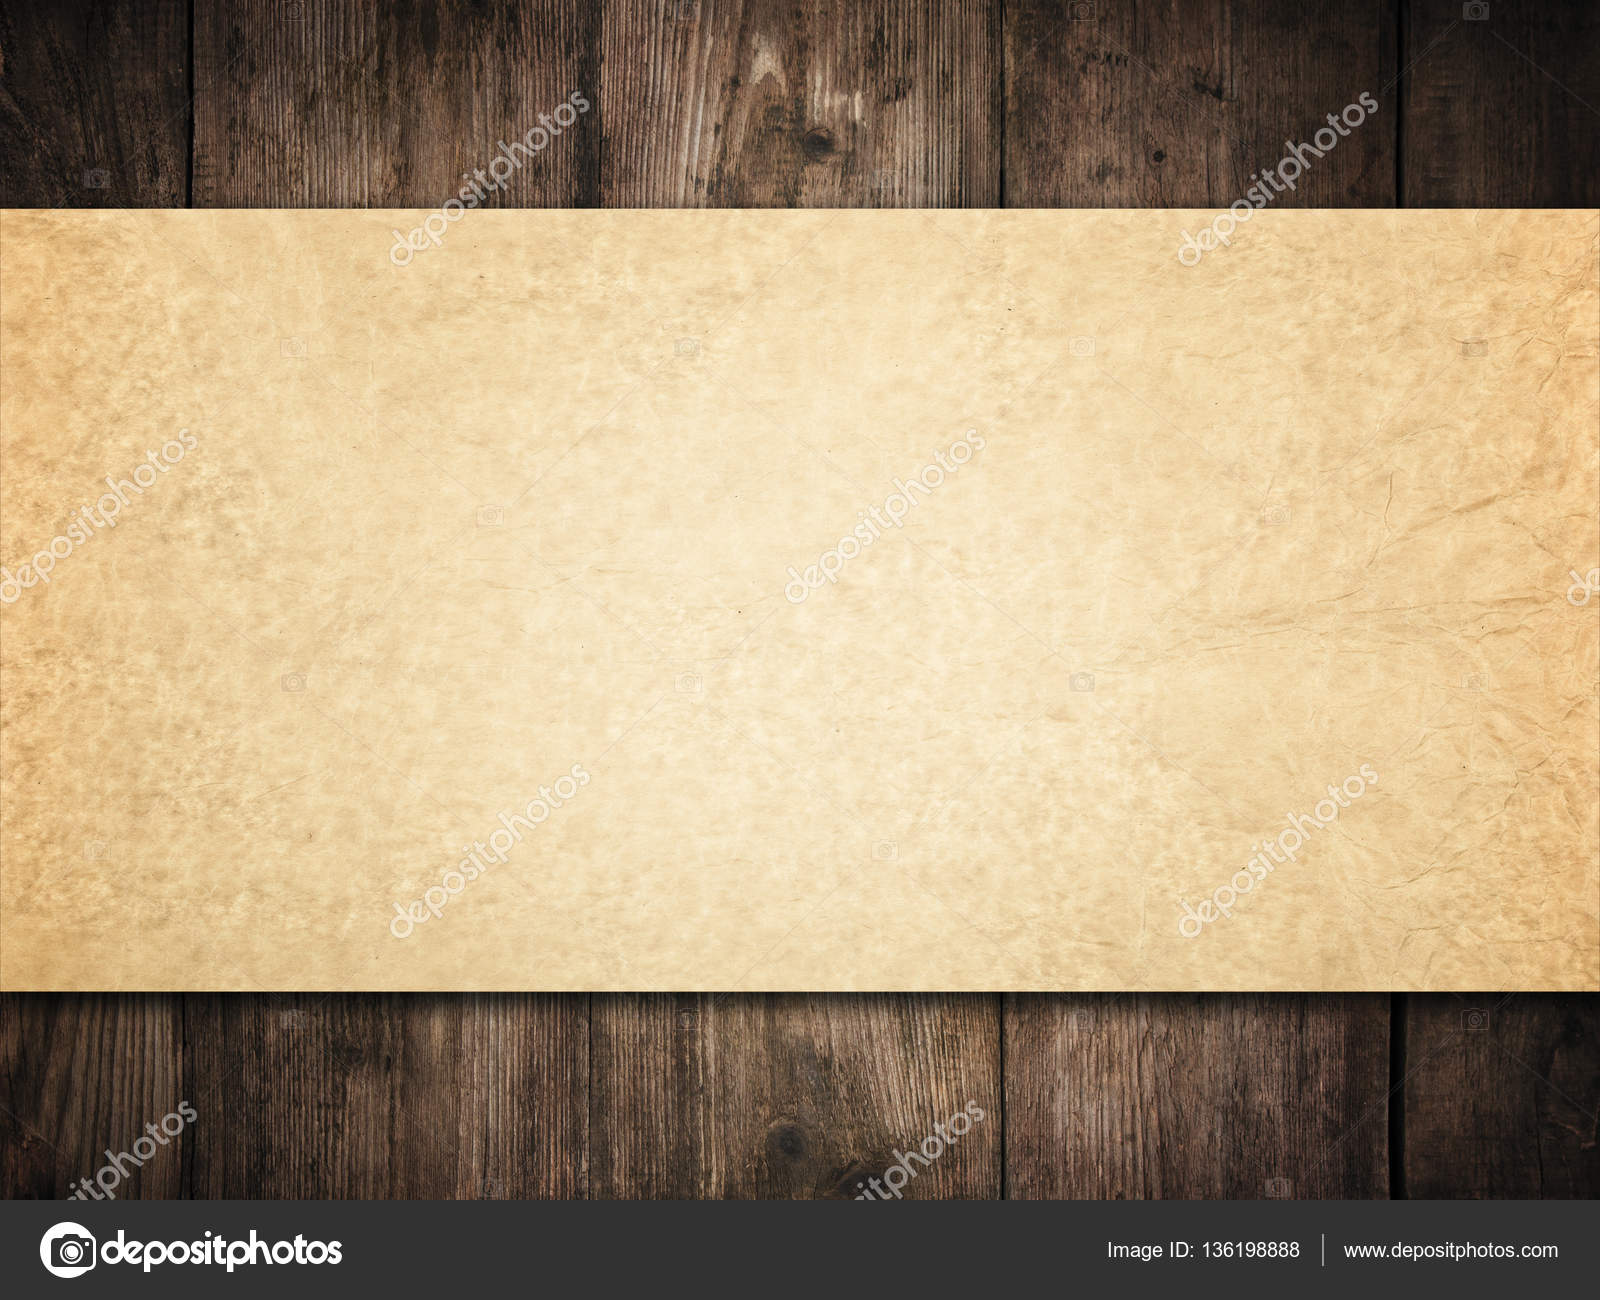 Old Paper Background on Wood Wall, Brown Papers Texture, Wooden ...